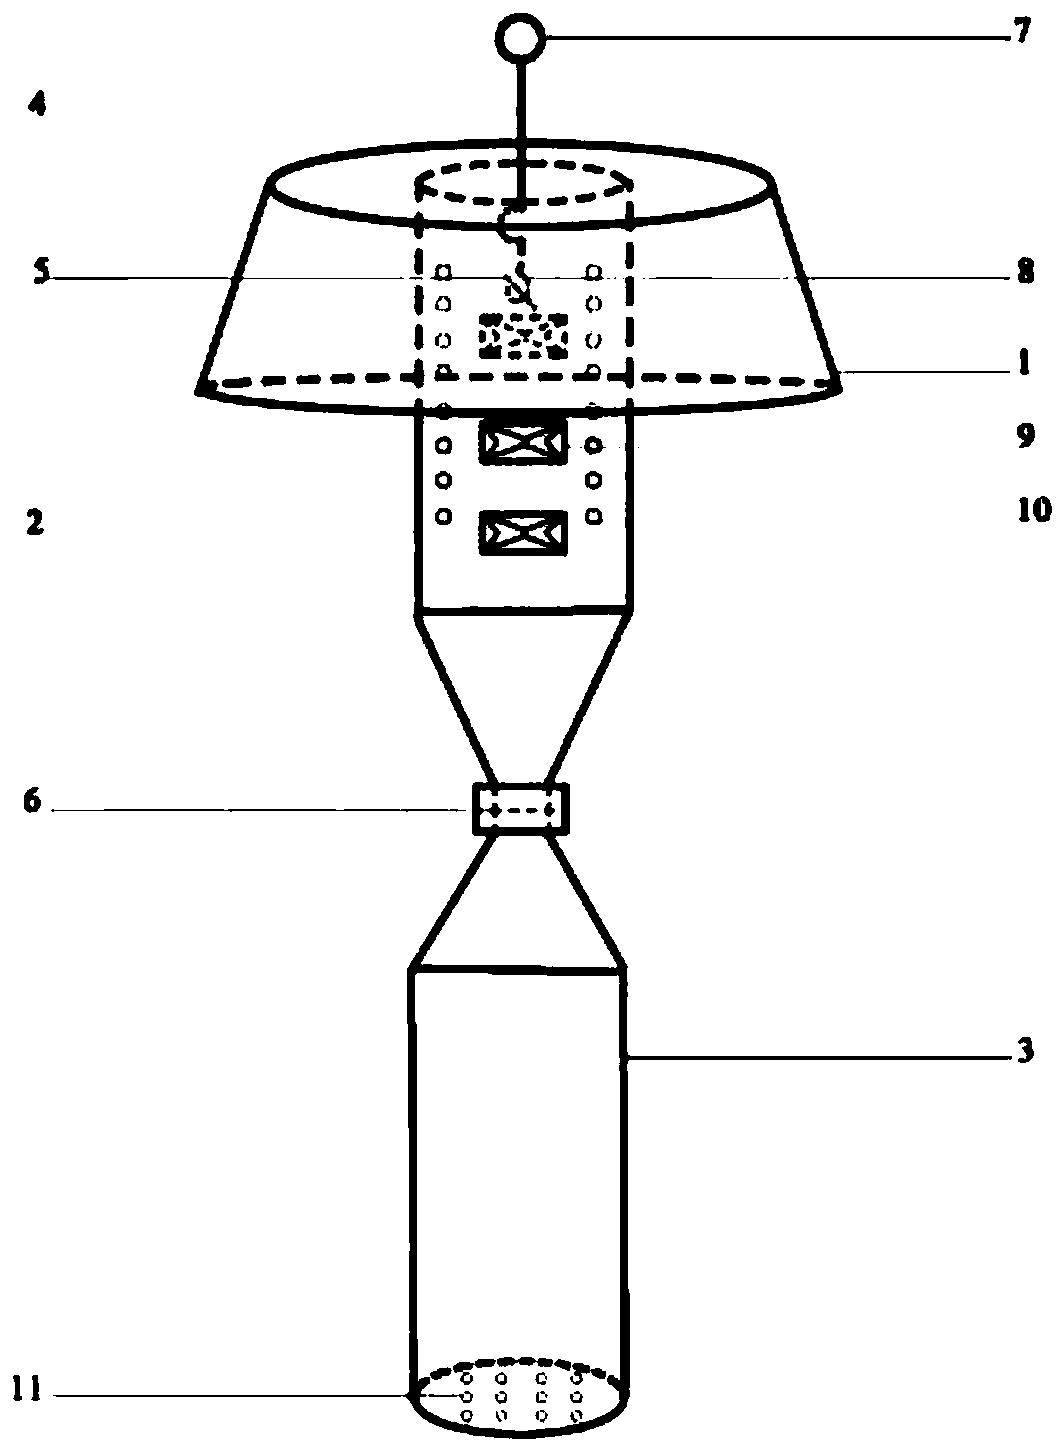 Diurnal moth trapping device